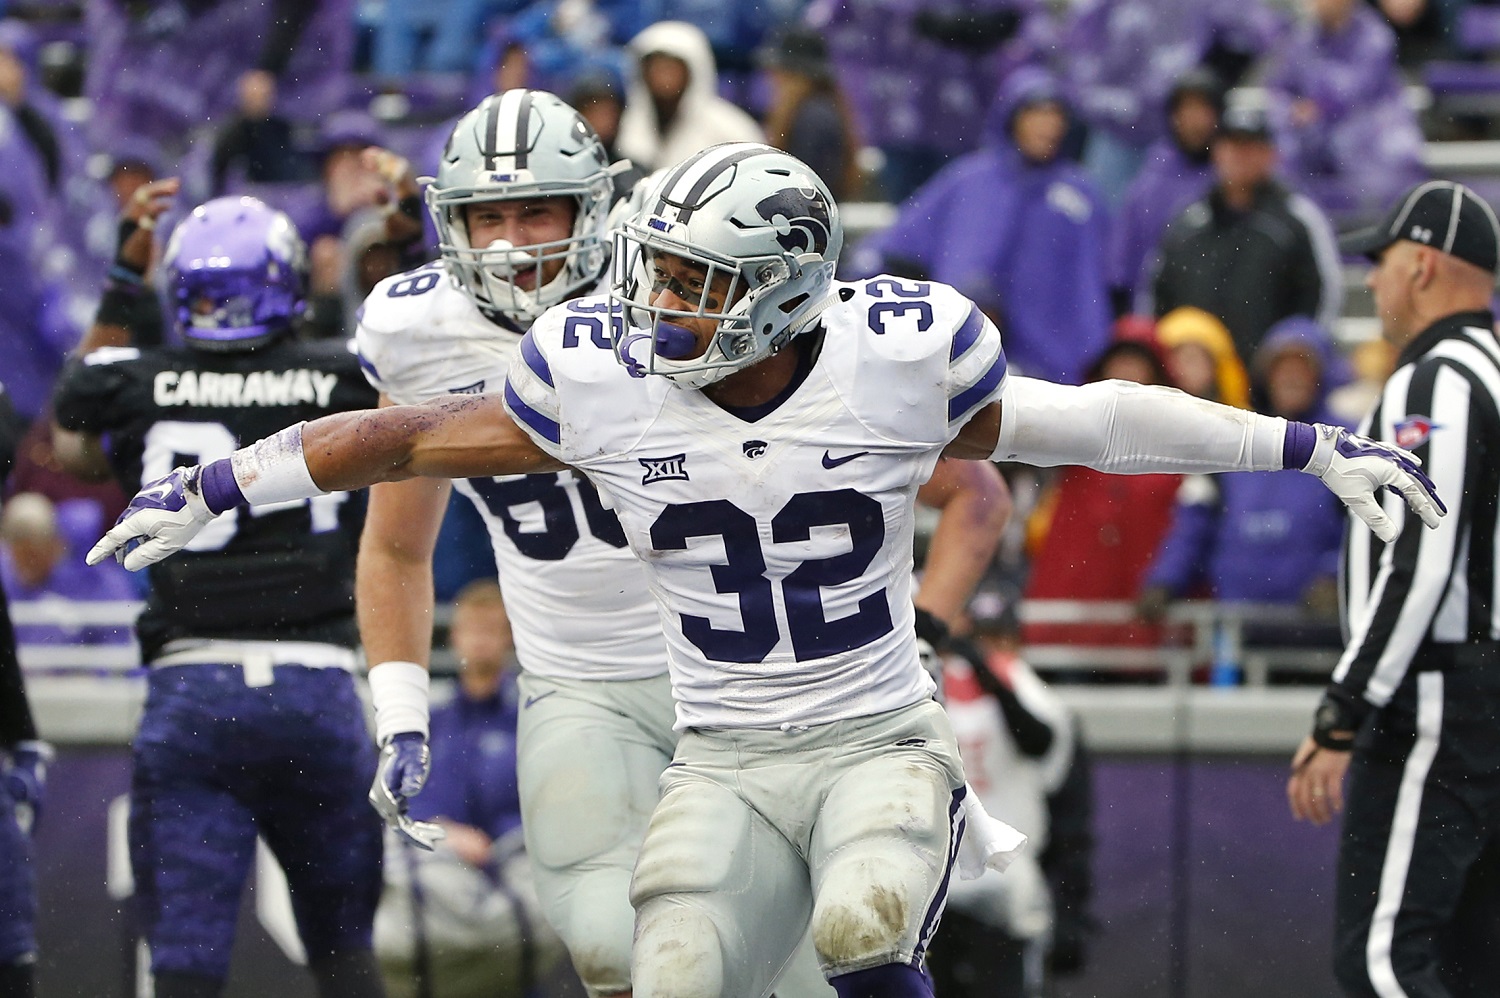 Kansas State running back Justin Silmon (32) and teammate Dayton Valentine (88) celebrate after Silmon ran for a touchdown against TCU during the second half of an NCAA college football game Saturday, Dec. 3, 2016, in Fort Worth, Texas. Kansas State won 30-6. (AP Photo/Ron Jenkins)